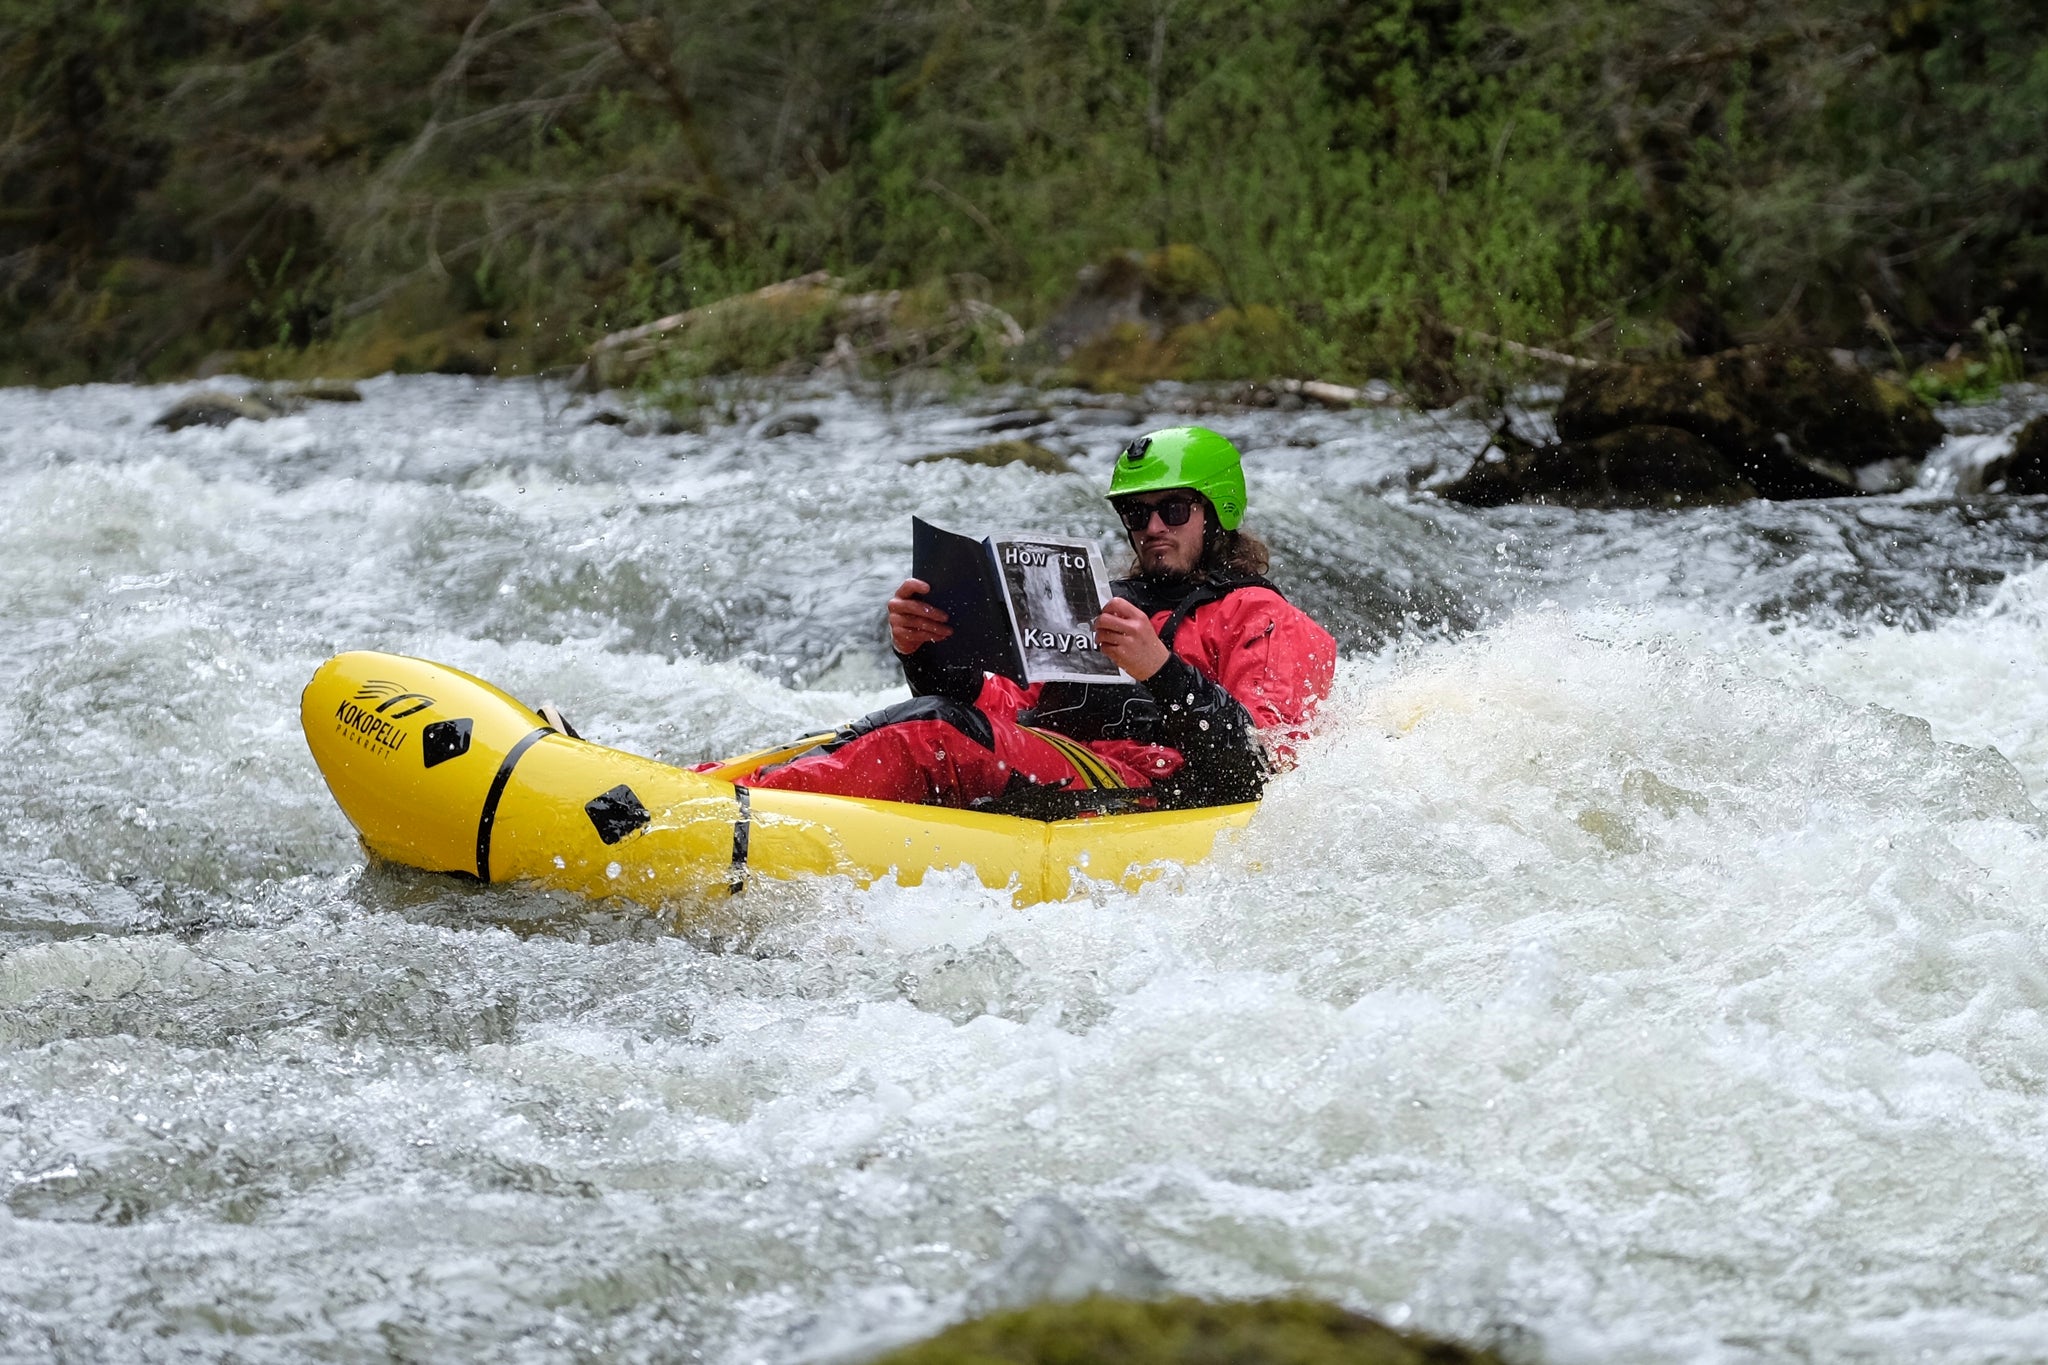 Reading How to Kayak book while packrafting a whitewater rapid